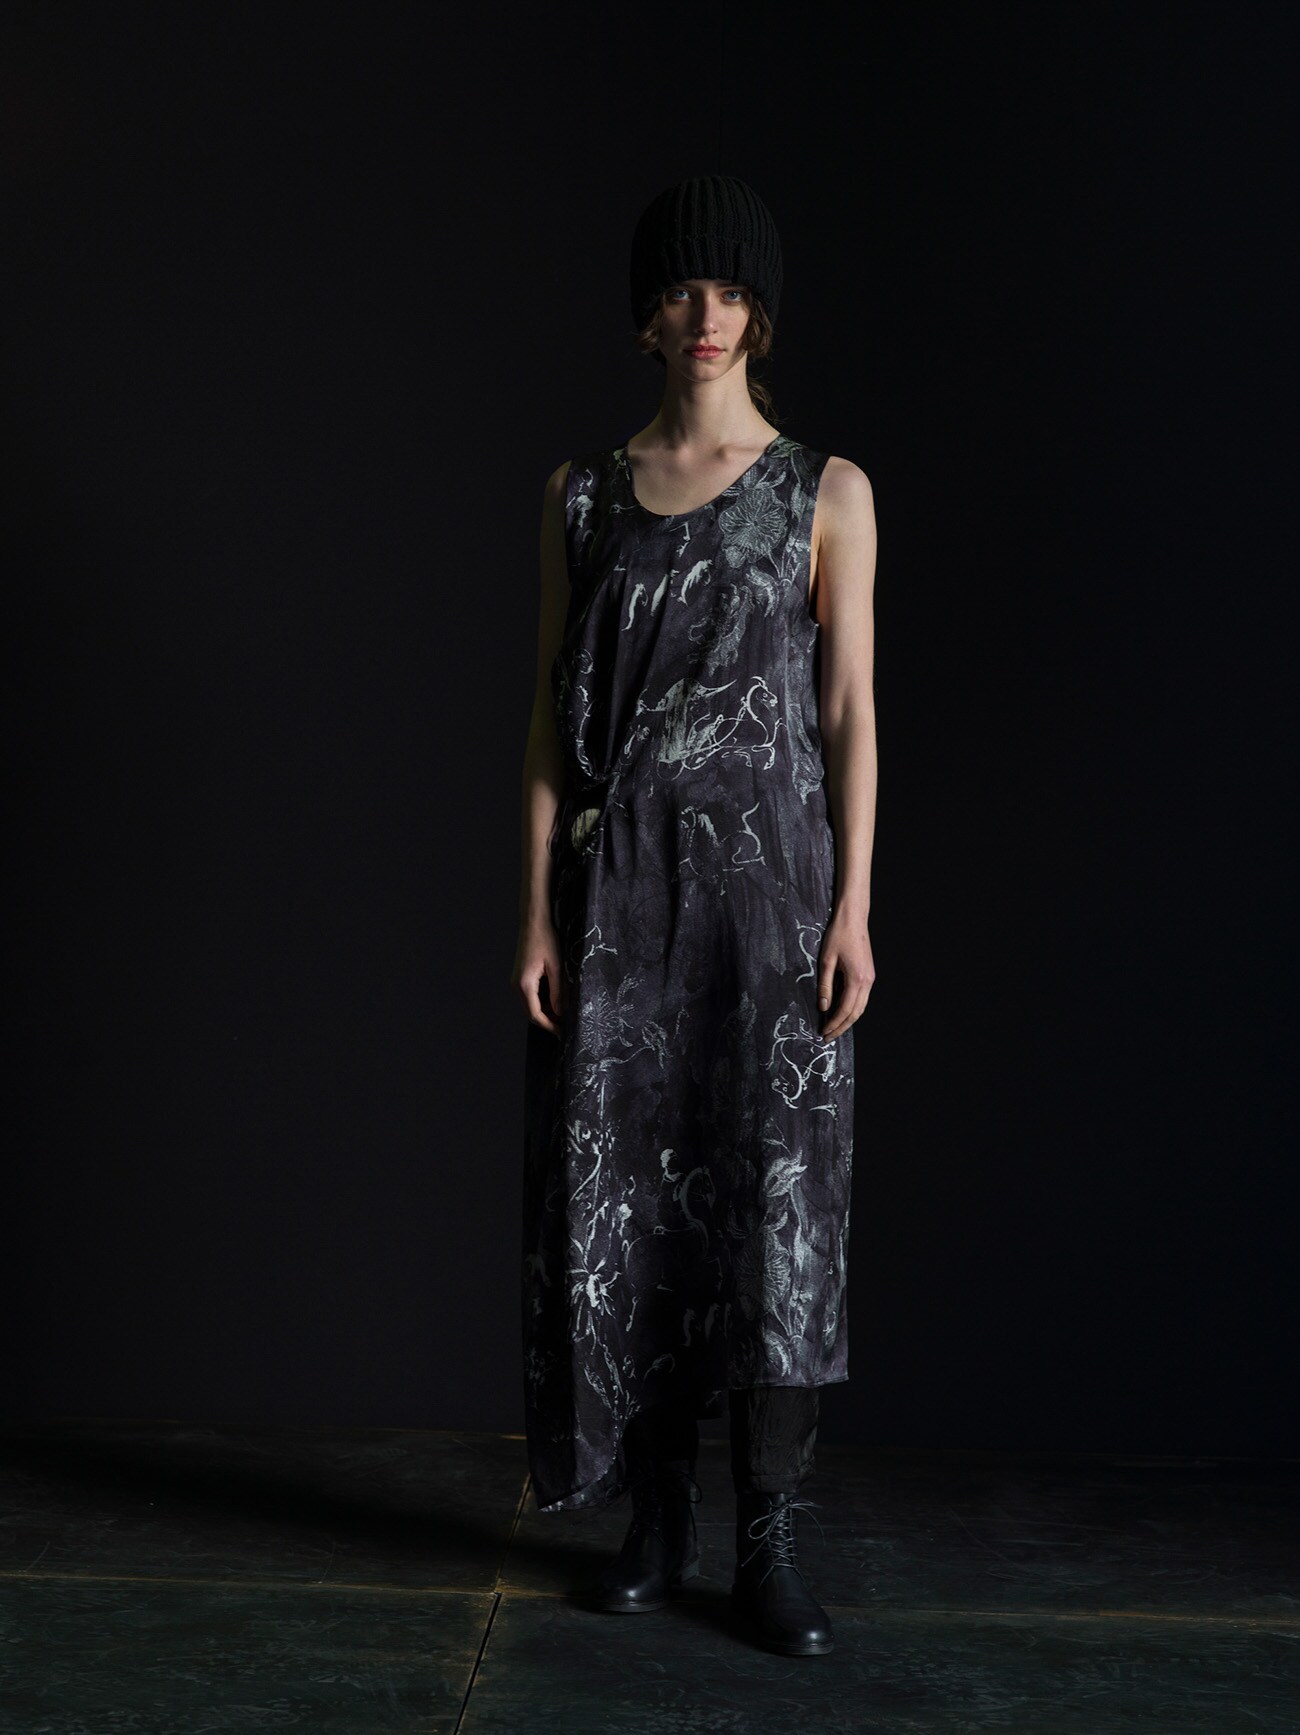 【LES ARTS GRAPHIQUES】 12 MOMME Si/SATIN BLACK WALL RIGHT GATHER HOLE DRESS